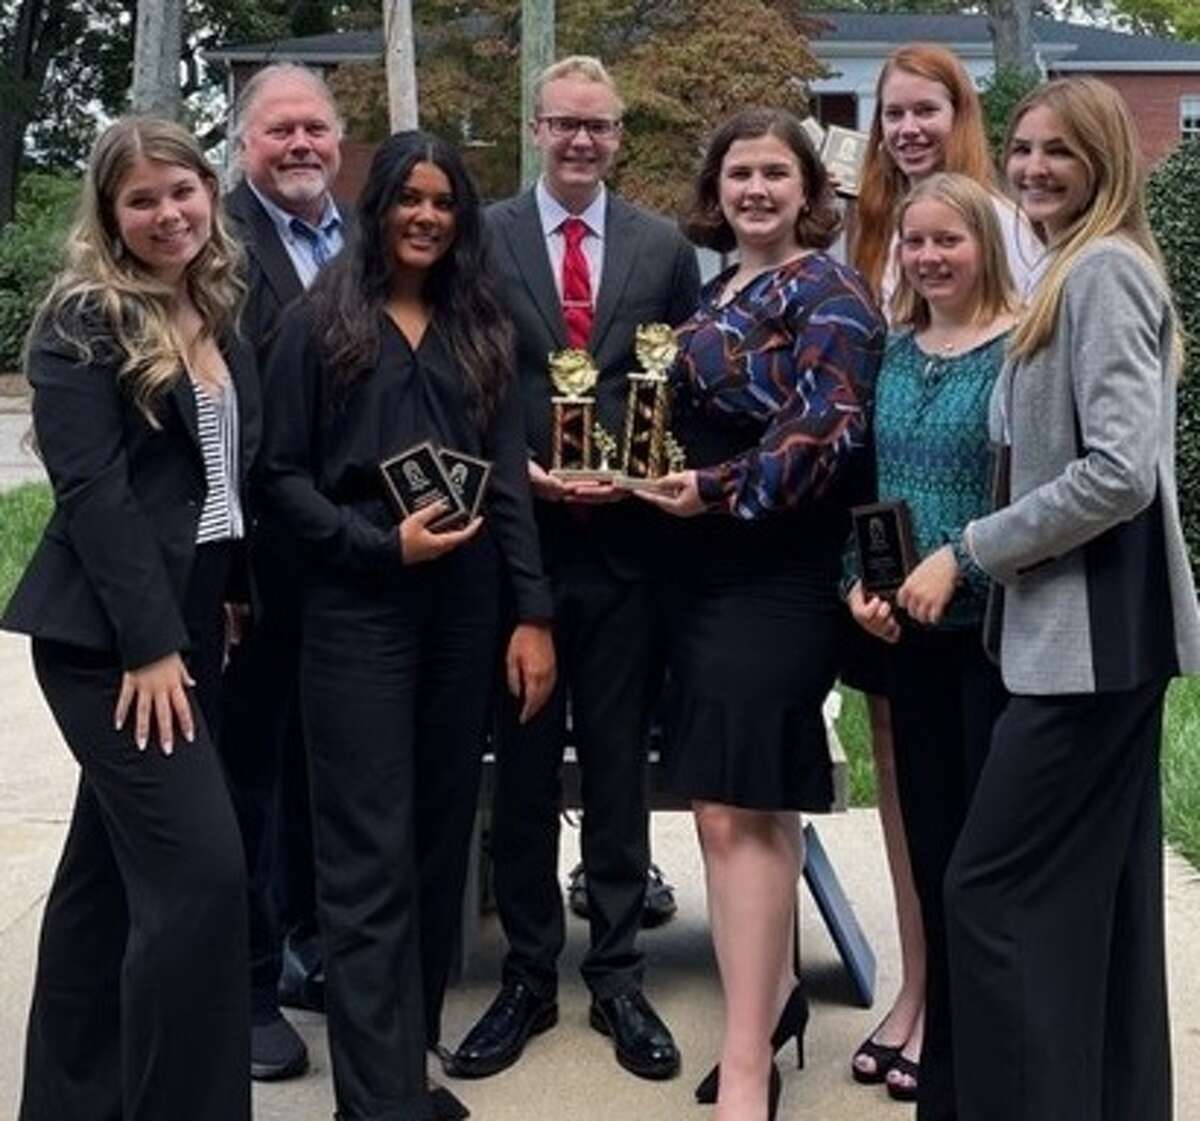 The Principia College International Academy of Dispute Resolution Mediation Team successfully defended its international championship ranking last month by capturing first place in two of the four categories of competition.